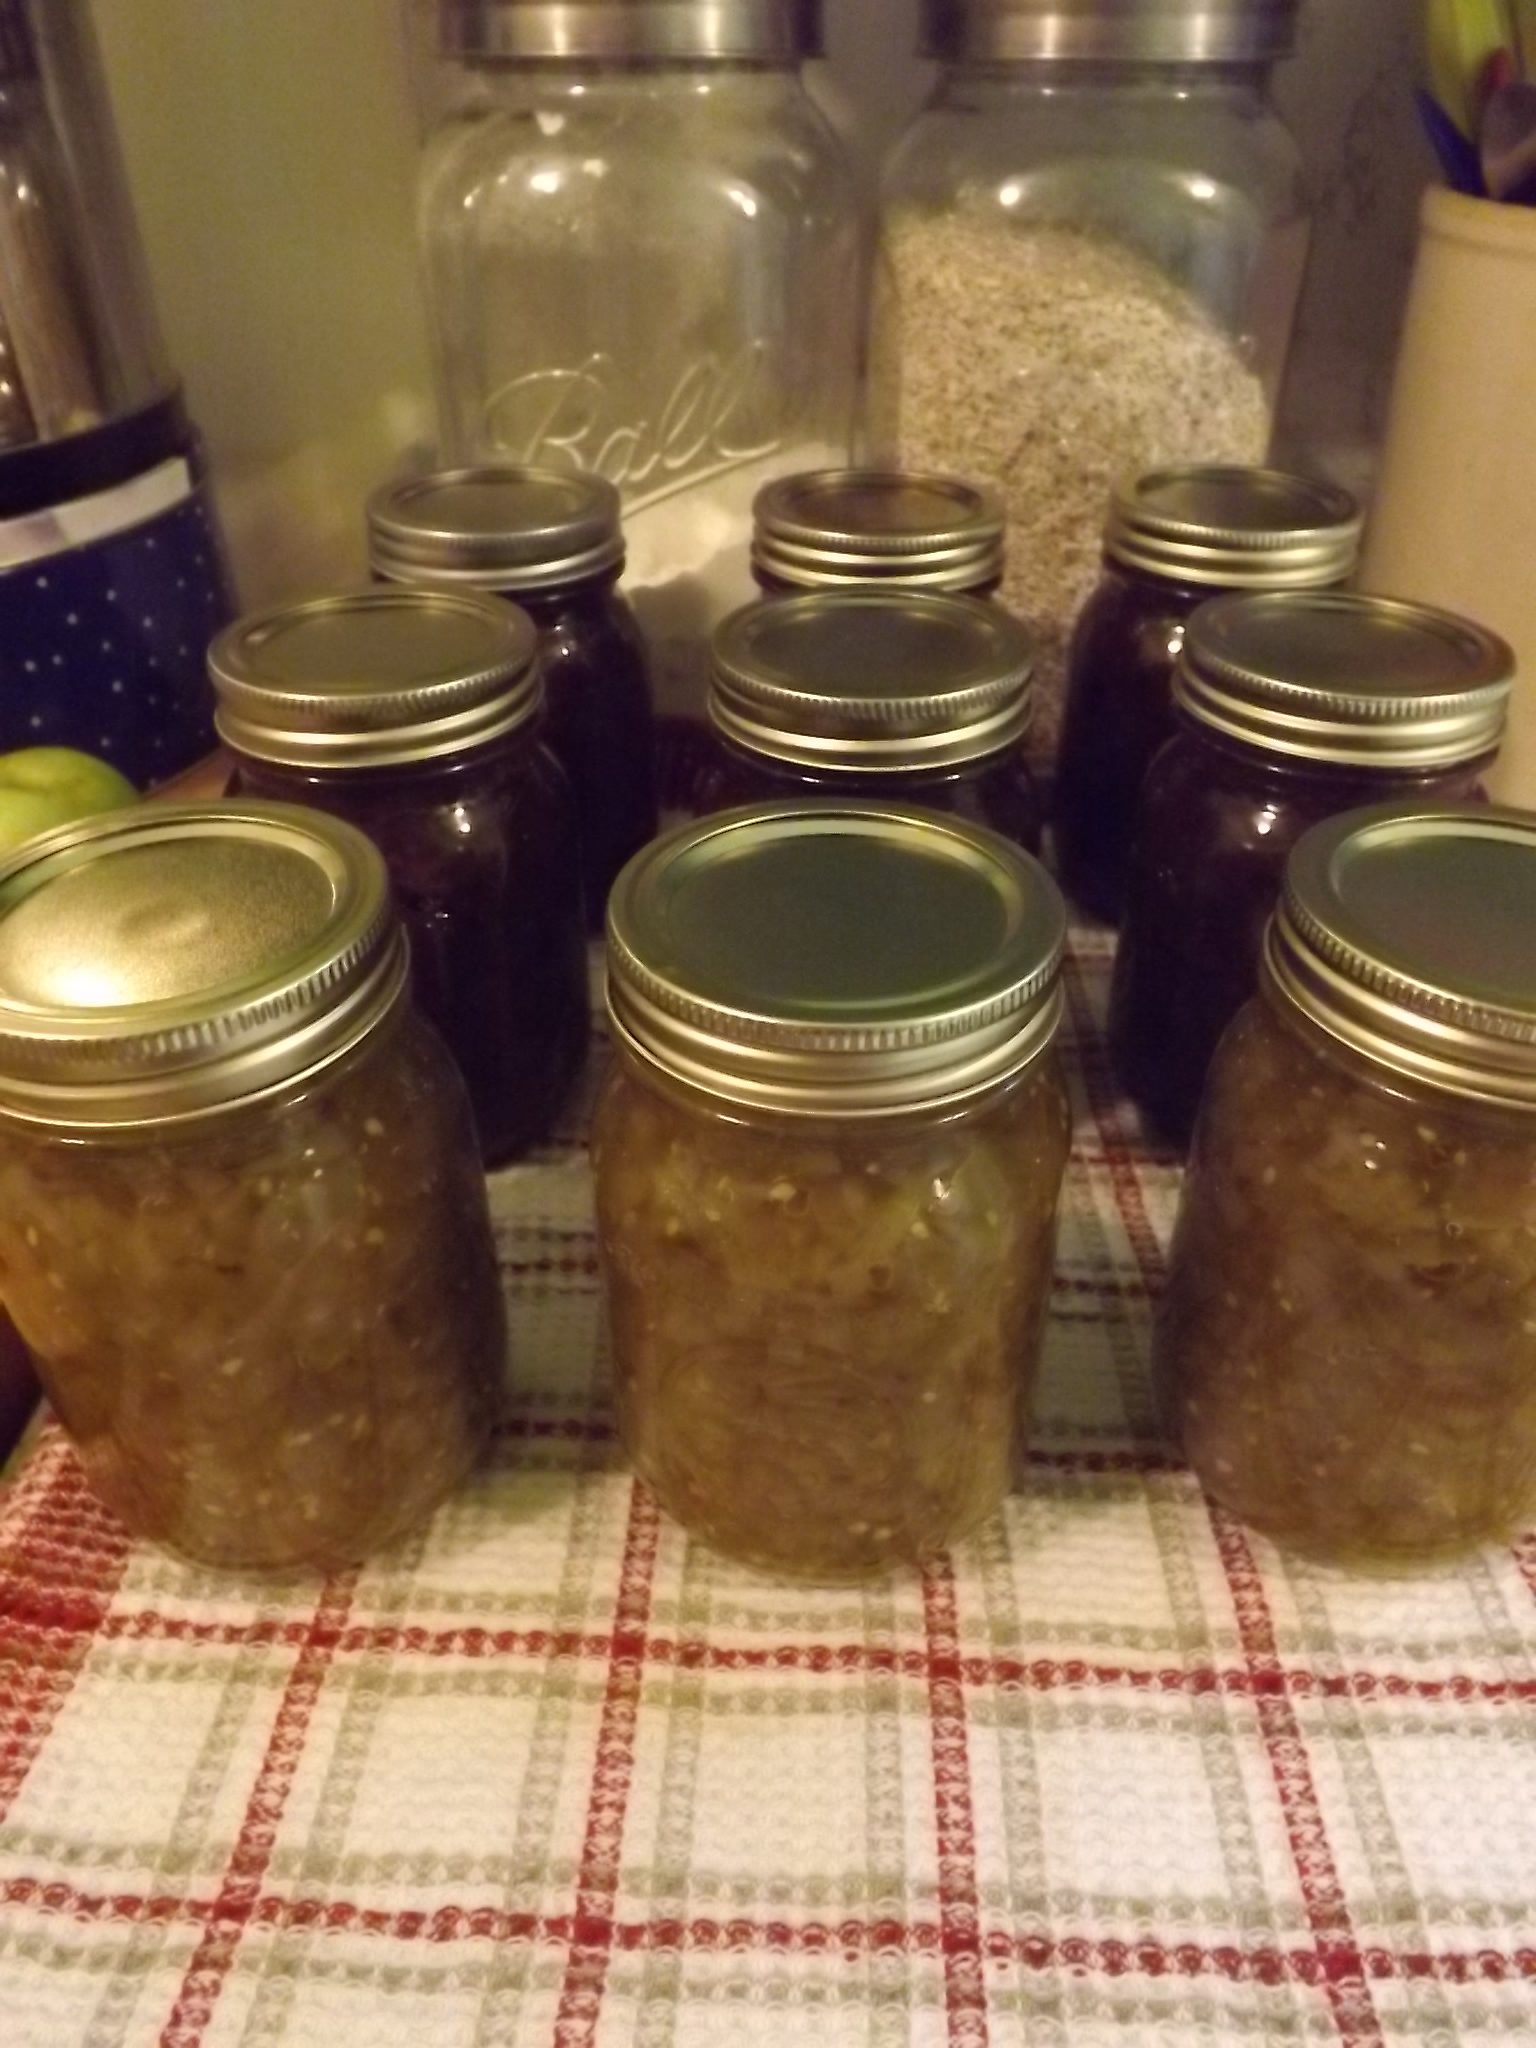 jars of mincemeat and relish